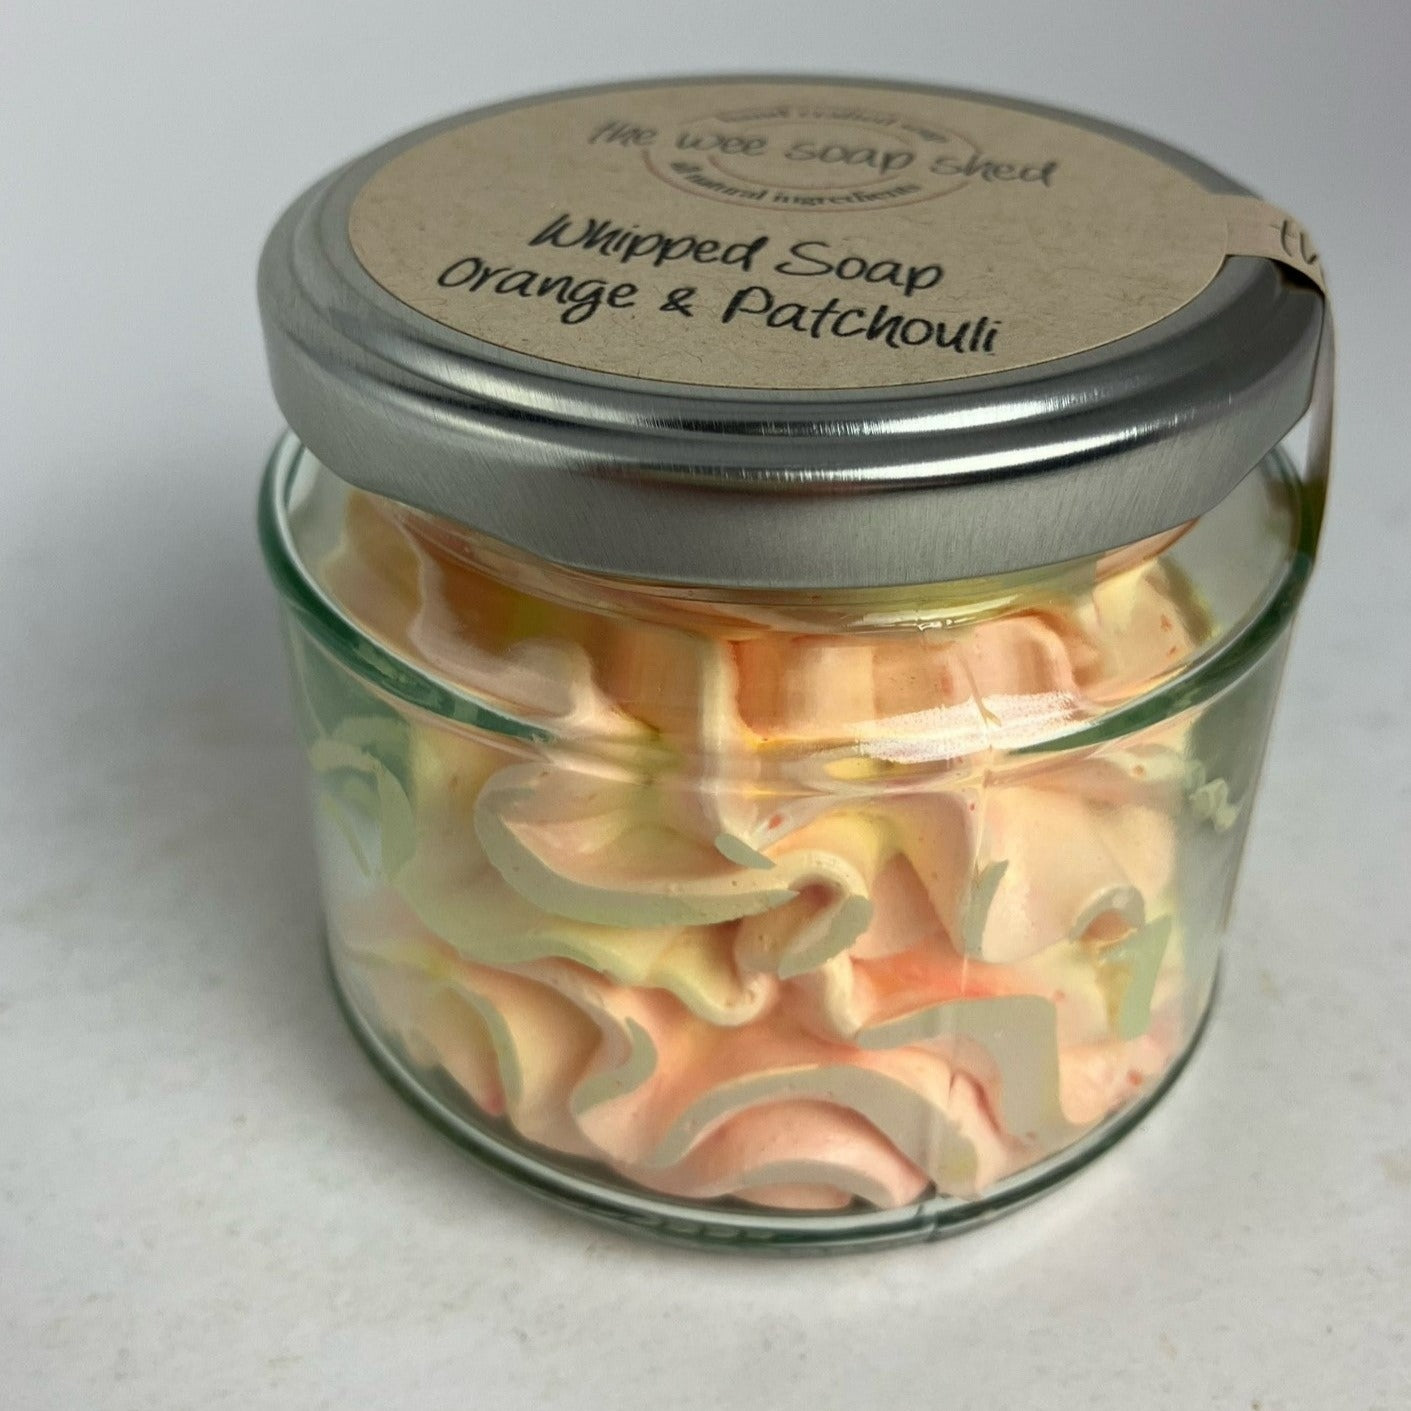 The Wee Soap Shed Orange & Patchouli Whipped Soap